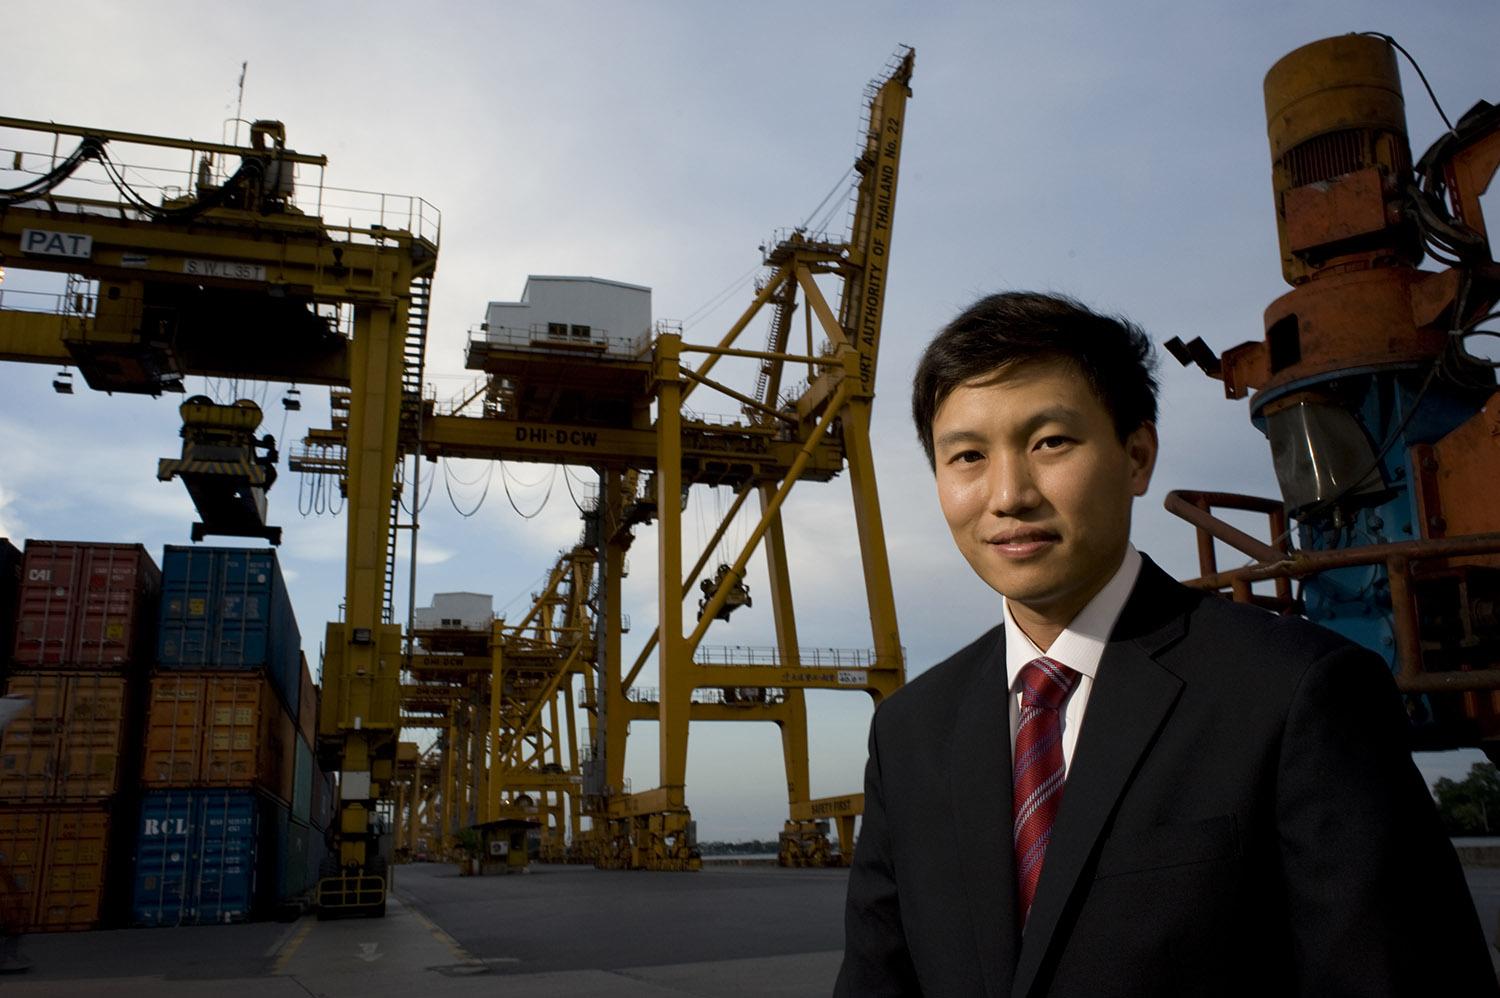 All photos in this article taken by Peter Charlesworth with off-camera Nikon and/or Vivitar flash units. Portraits of Chalermchai Mahagitsiri, CEO of the PM Group Company Limited at the main cargo port in Khlong Toei Bangkok.